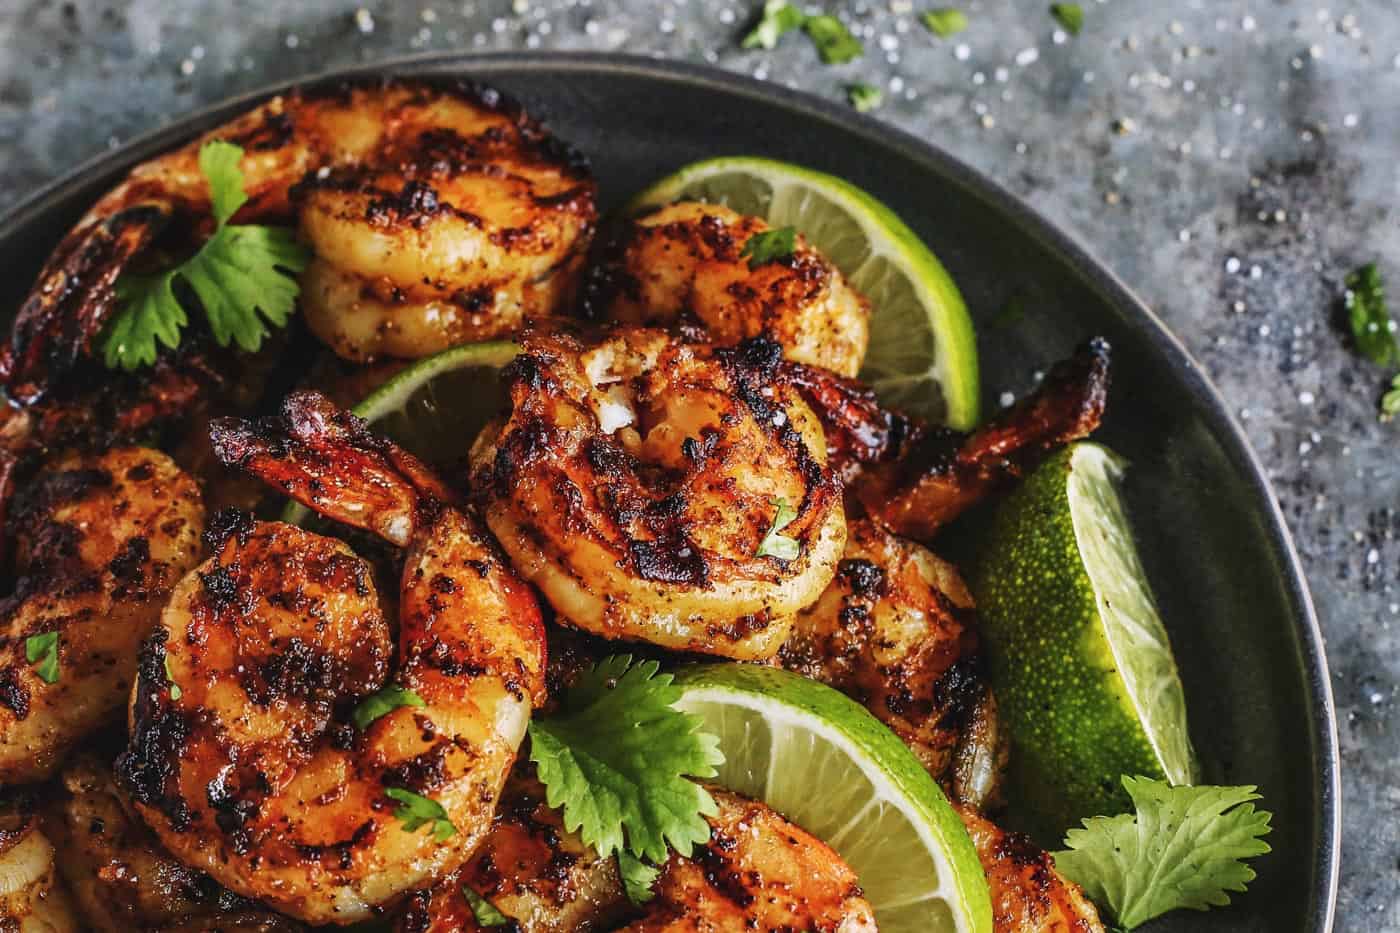 Grilled shrimp with charred grill lines.